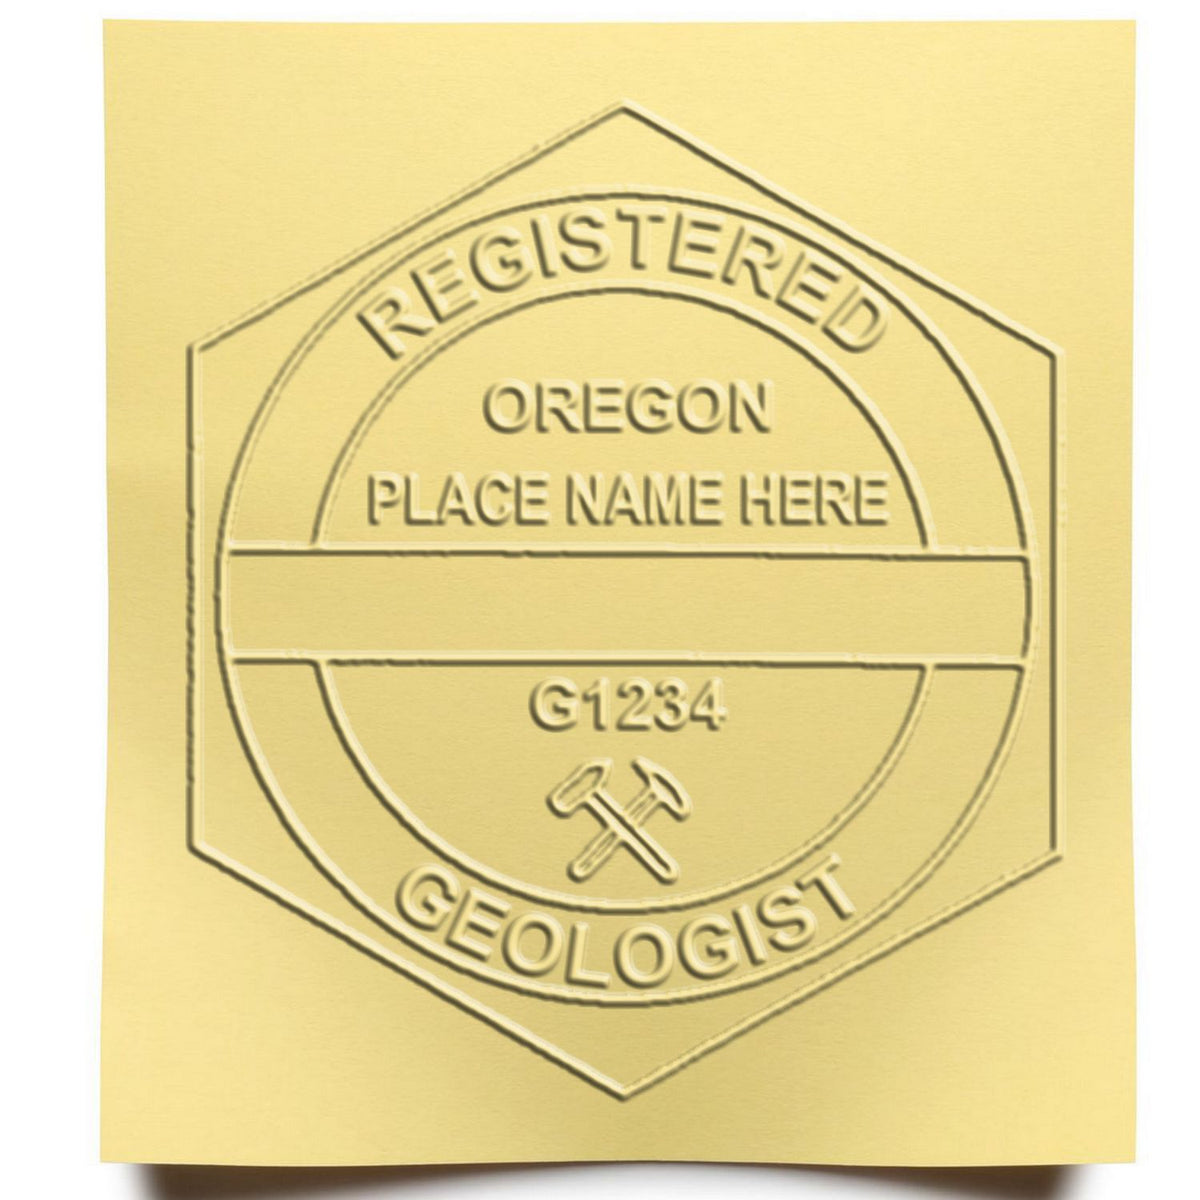 An in use photo of the Soft Oregon Professional Geologist Seal showing a sample imprint on a cardstock